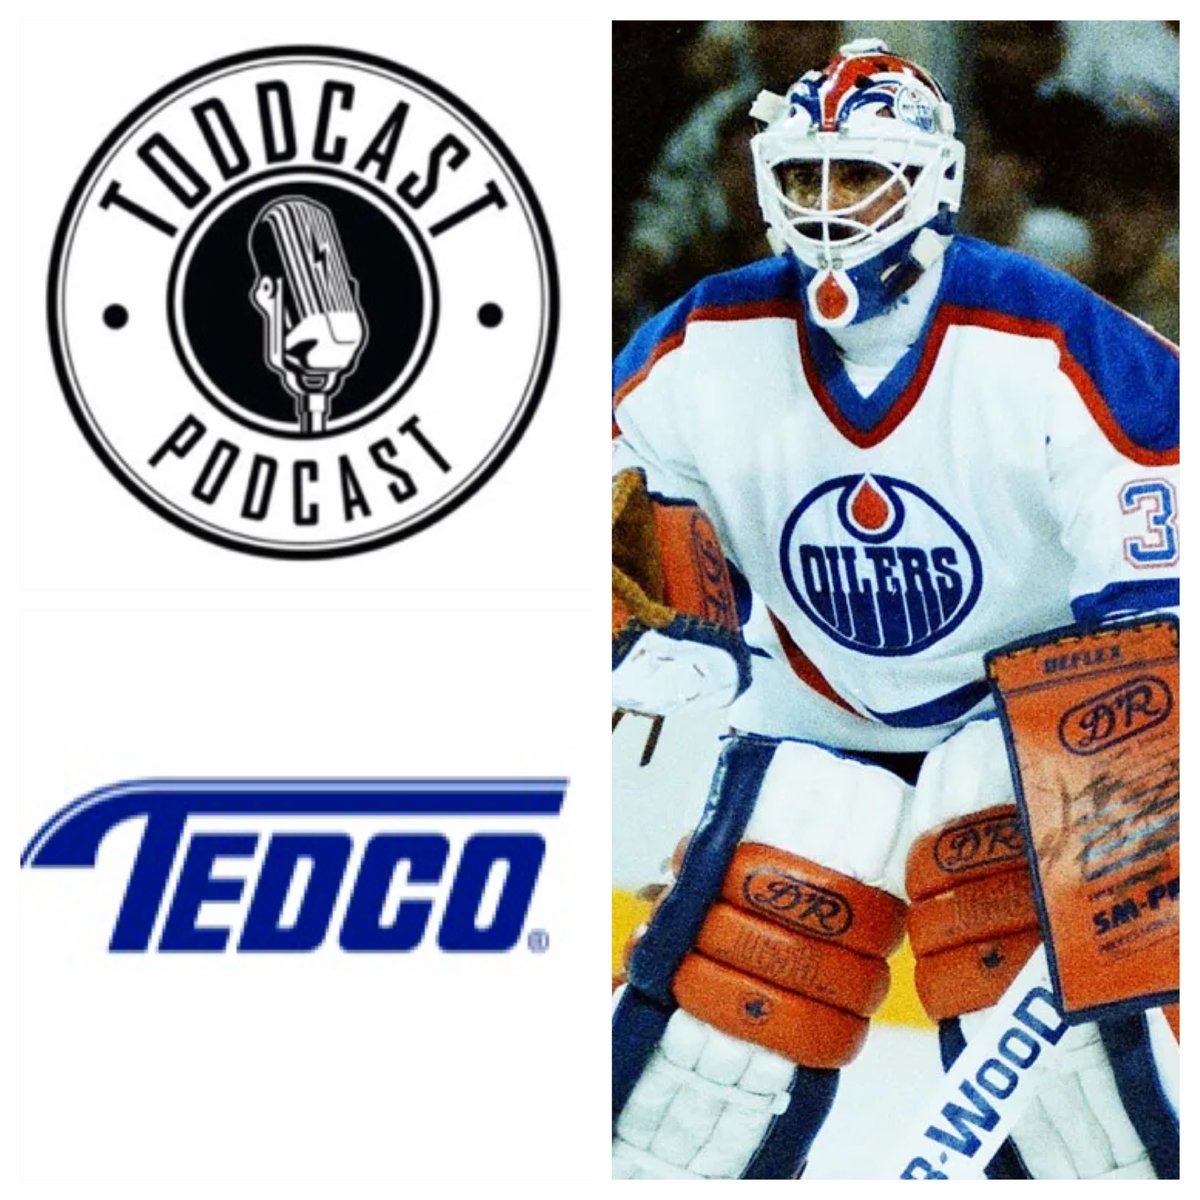 Retired 5x #StanleyCup winning goaltender Grant Fuhr talks about being inducted into the #NHL Hall of Fame in "Listen To This" Ep.154!



* Powered by @TedcoRVSupplies in #Langley! Service. Repair. #ICBC accredited. 